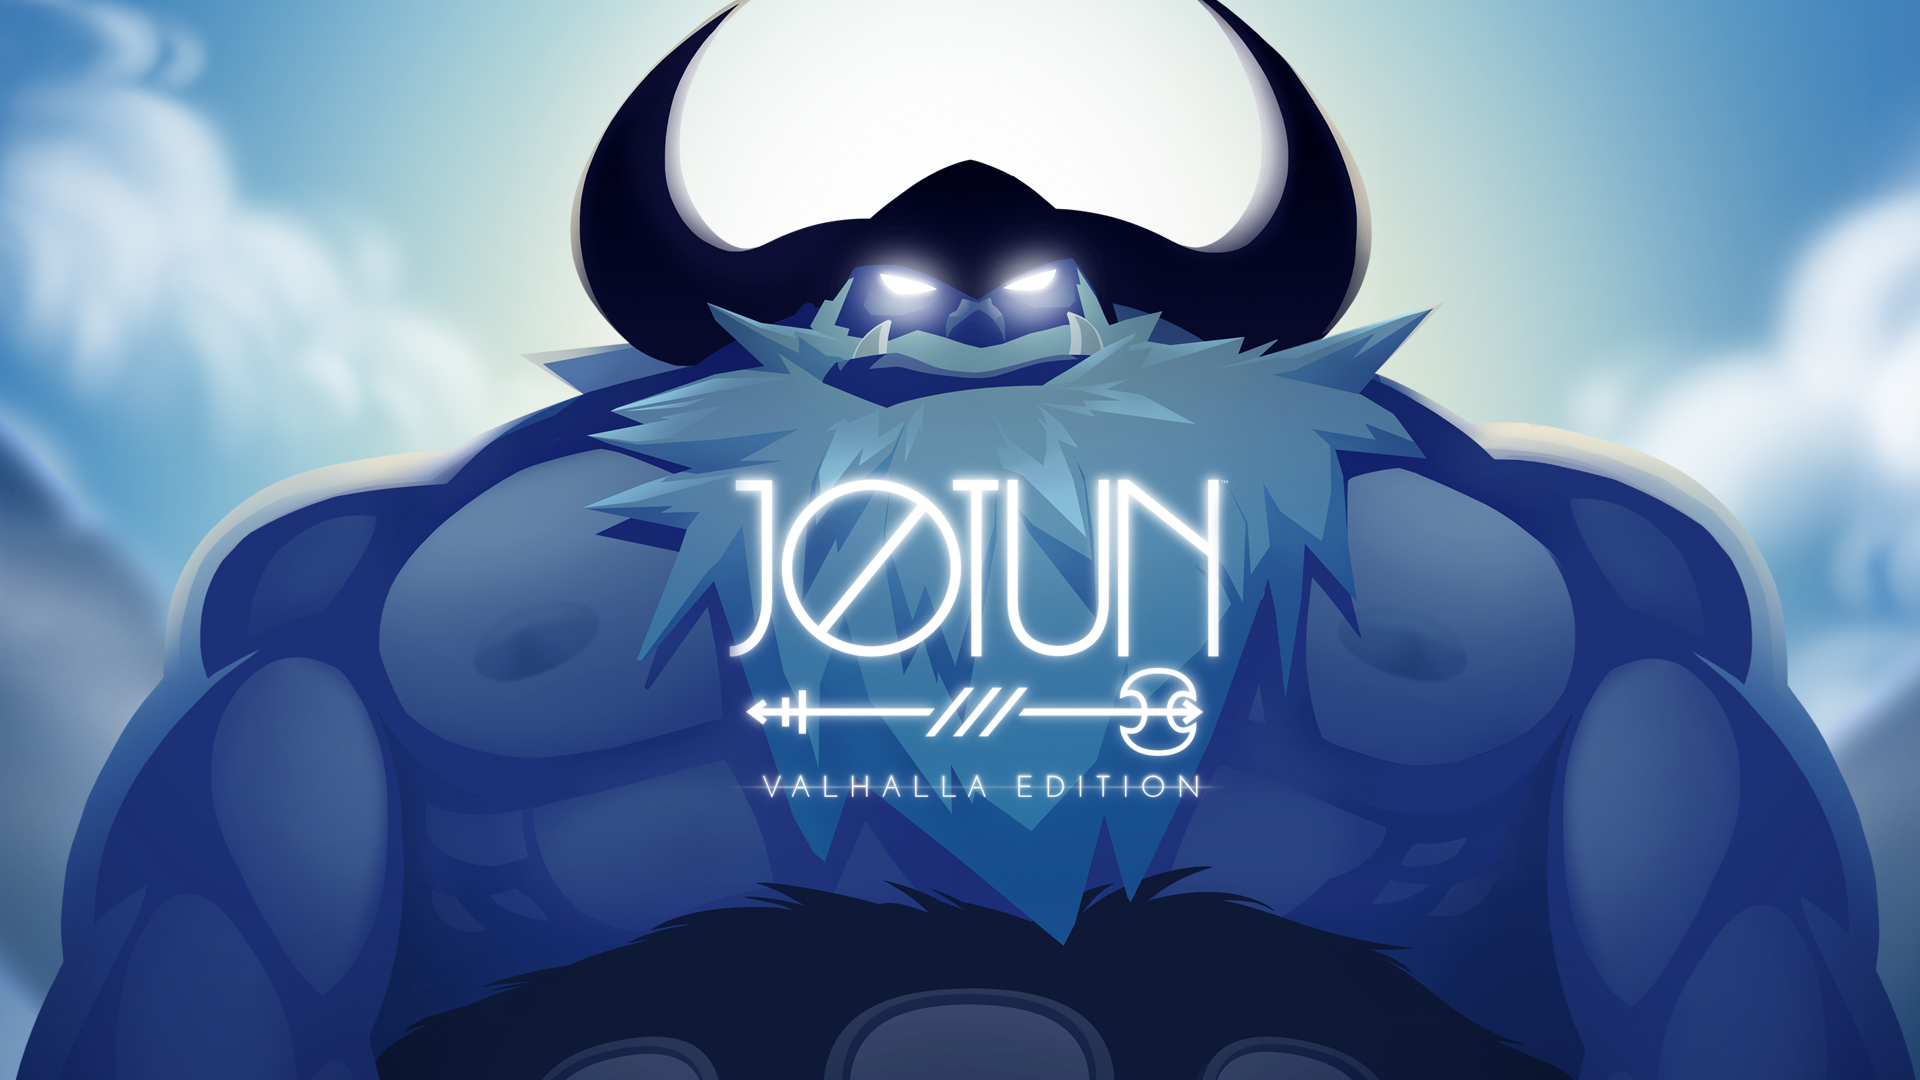 how long does it take to finish jotun valhalla edition